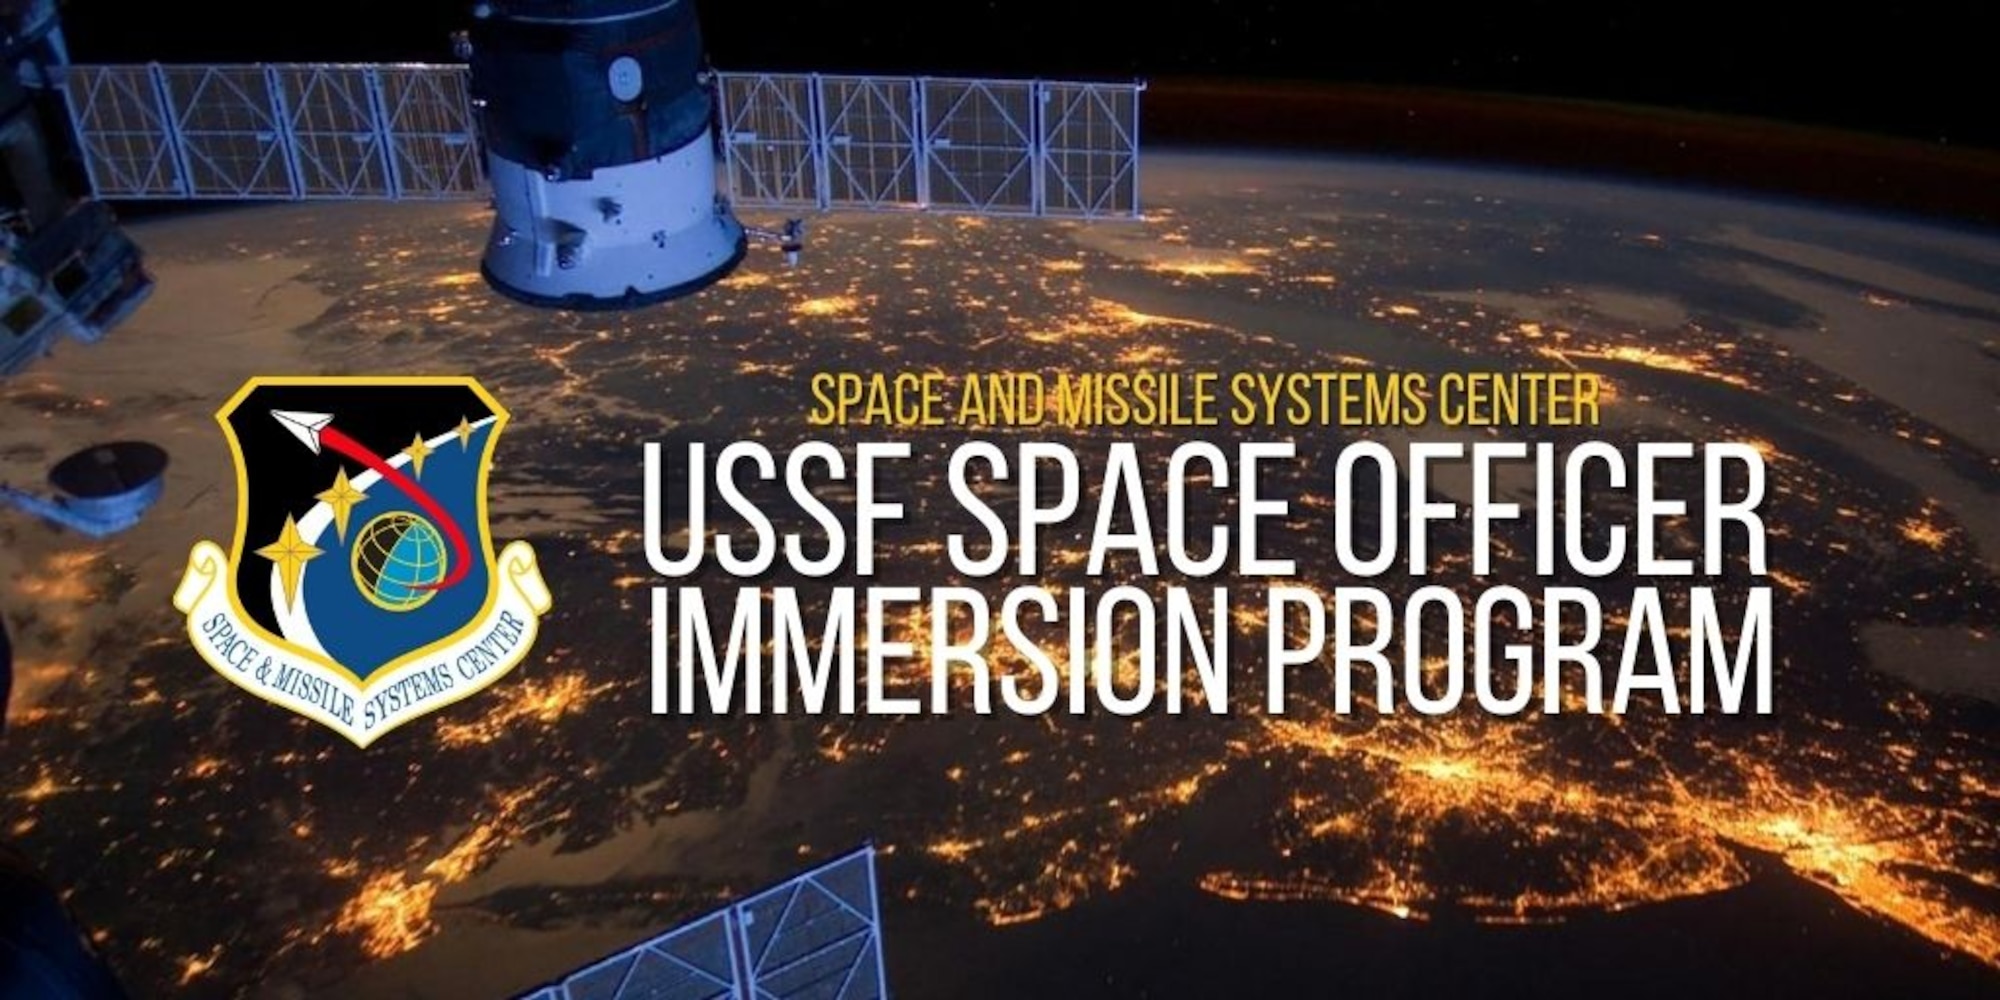 The United States Space Force (USSF) and its premiere acquisition arm, the Space and Missile Systems Center (SMC) successfully welcomed the incoming class of newly commissioned officers through a brand-new and completely virtual USSF Space Officer Immersion Program from July 7 to 31.